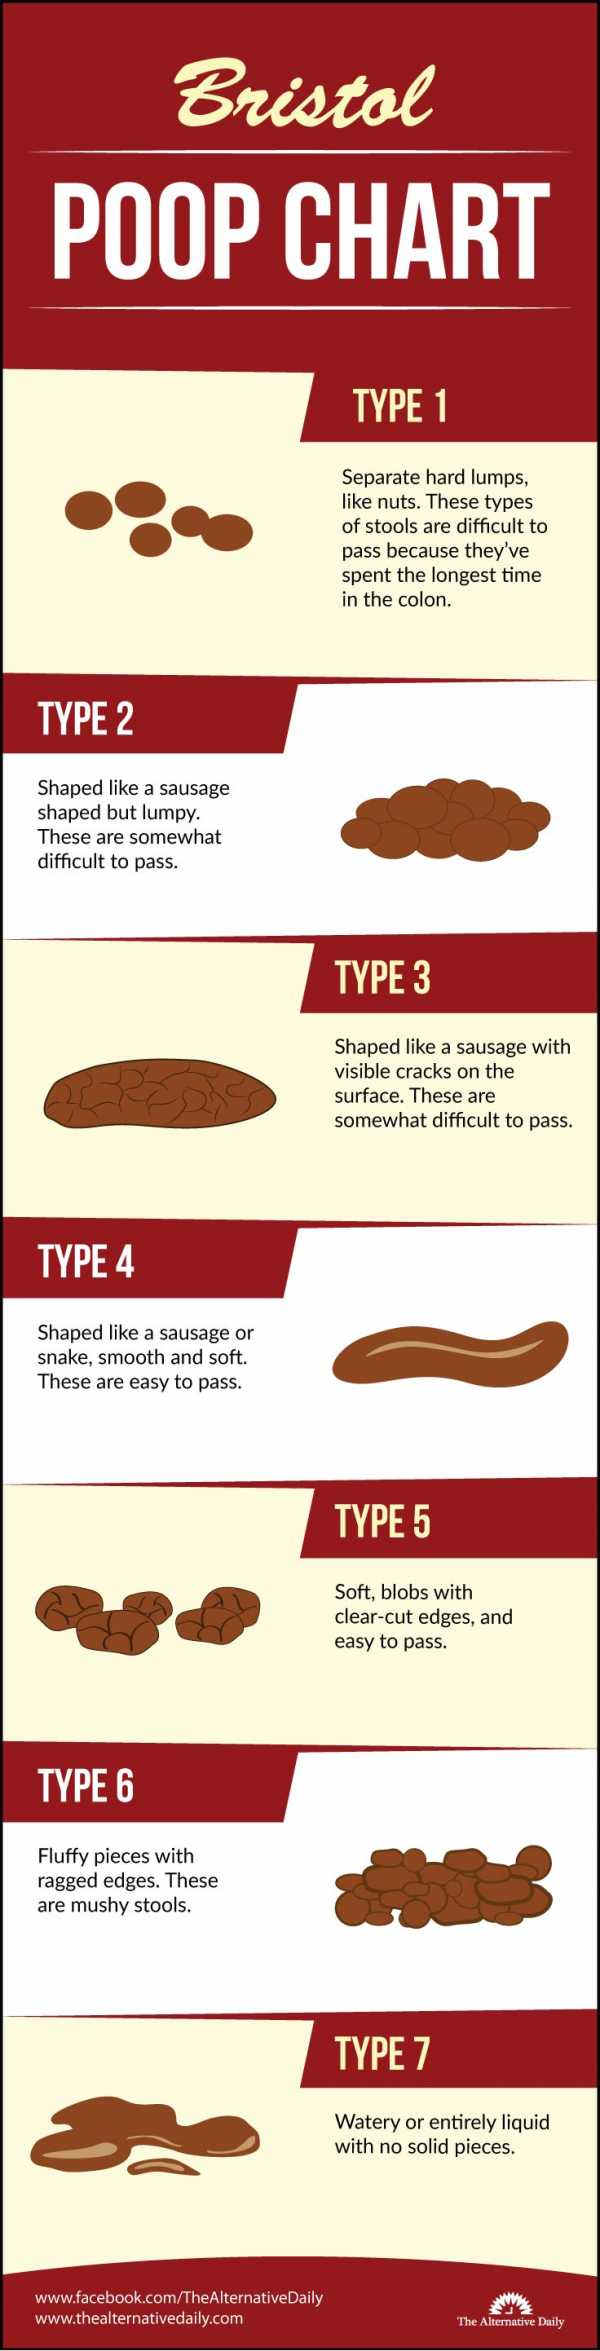 Bristol Poop Chart Which Of These 7 Types Of Poop Do You Have